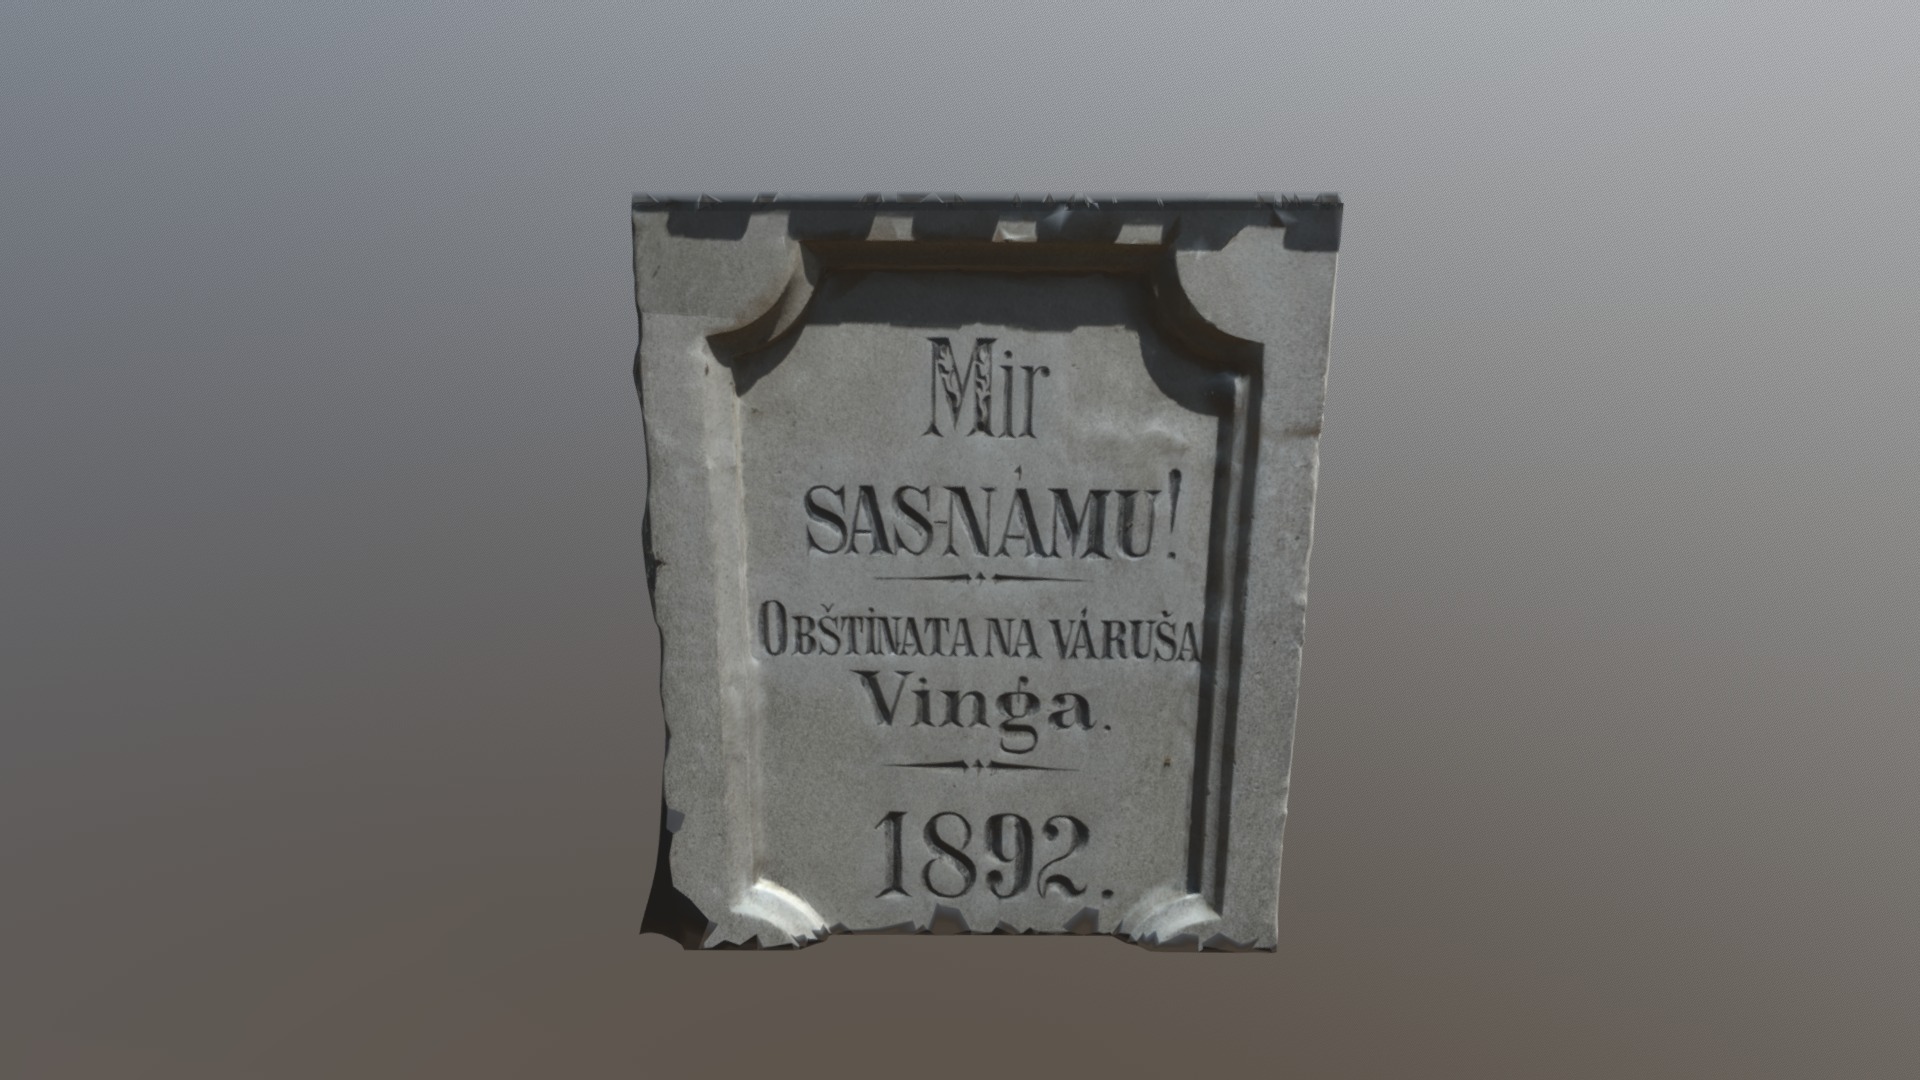 3D model 1892 - This is a 3D model of the 1892. The 3D model is about a metal box with a sign on it.